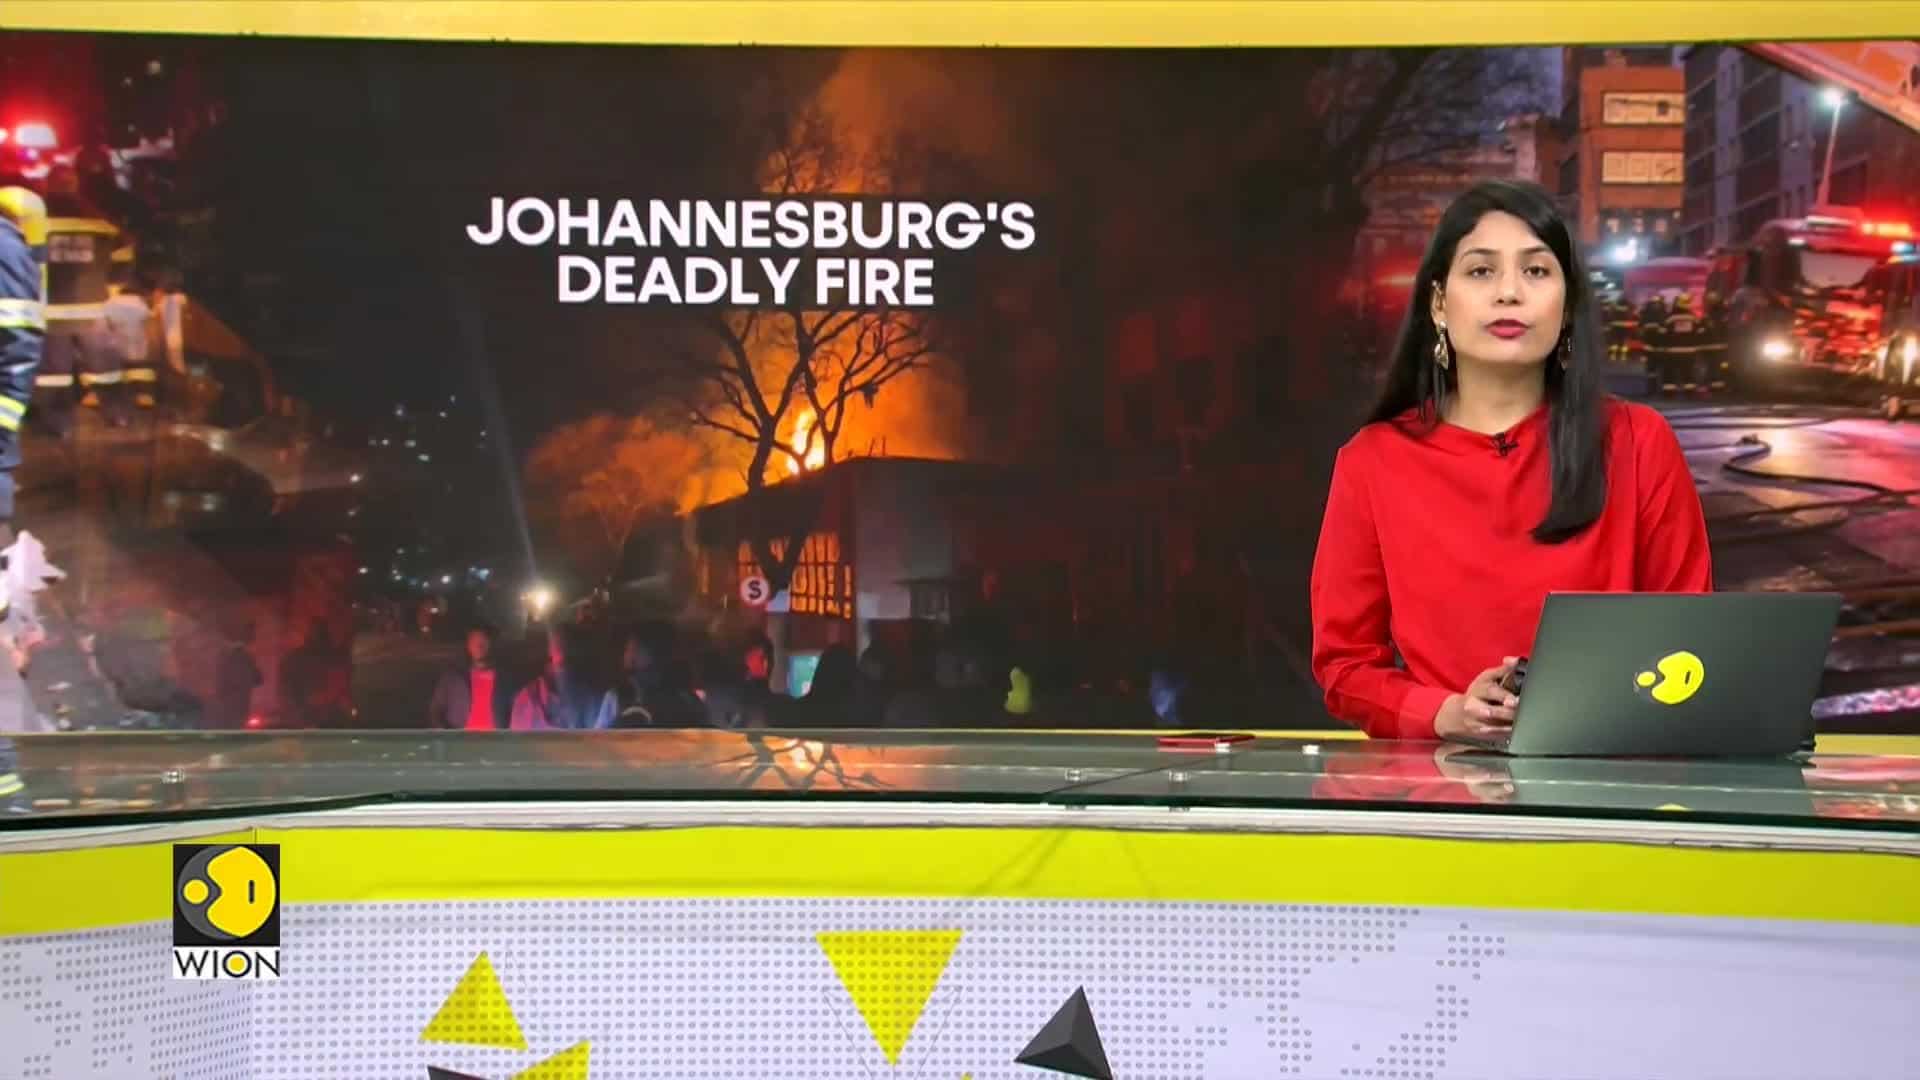 At least 73 dead in a fire in Johannesburg